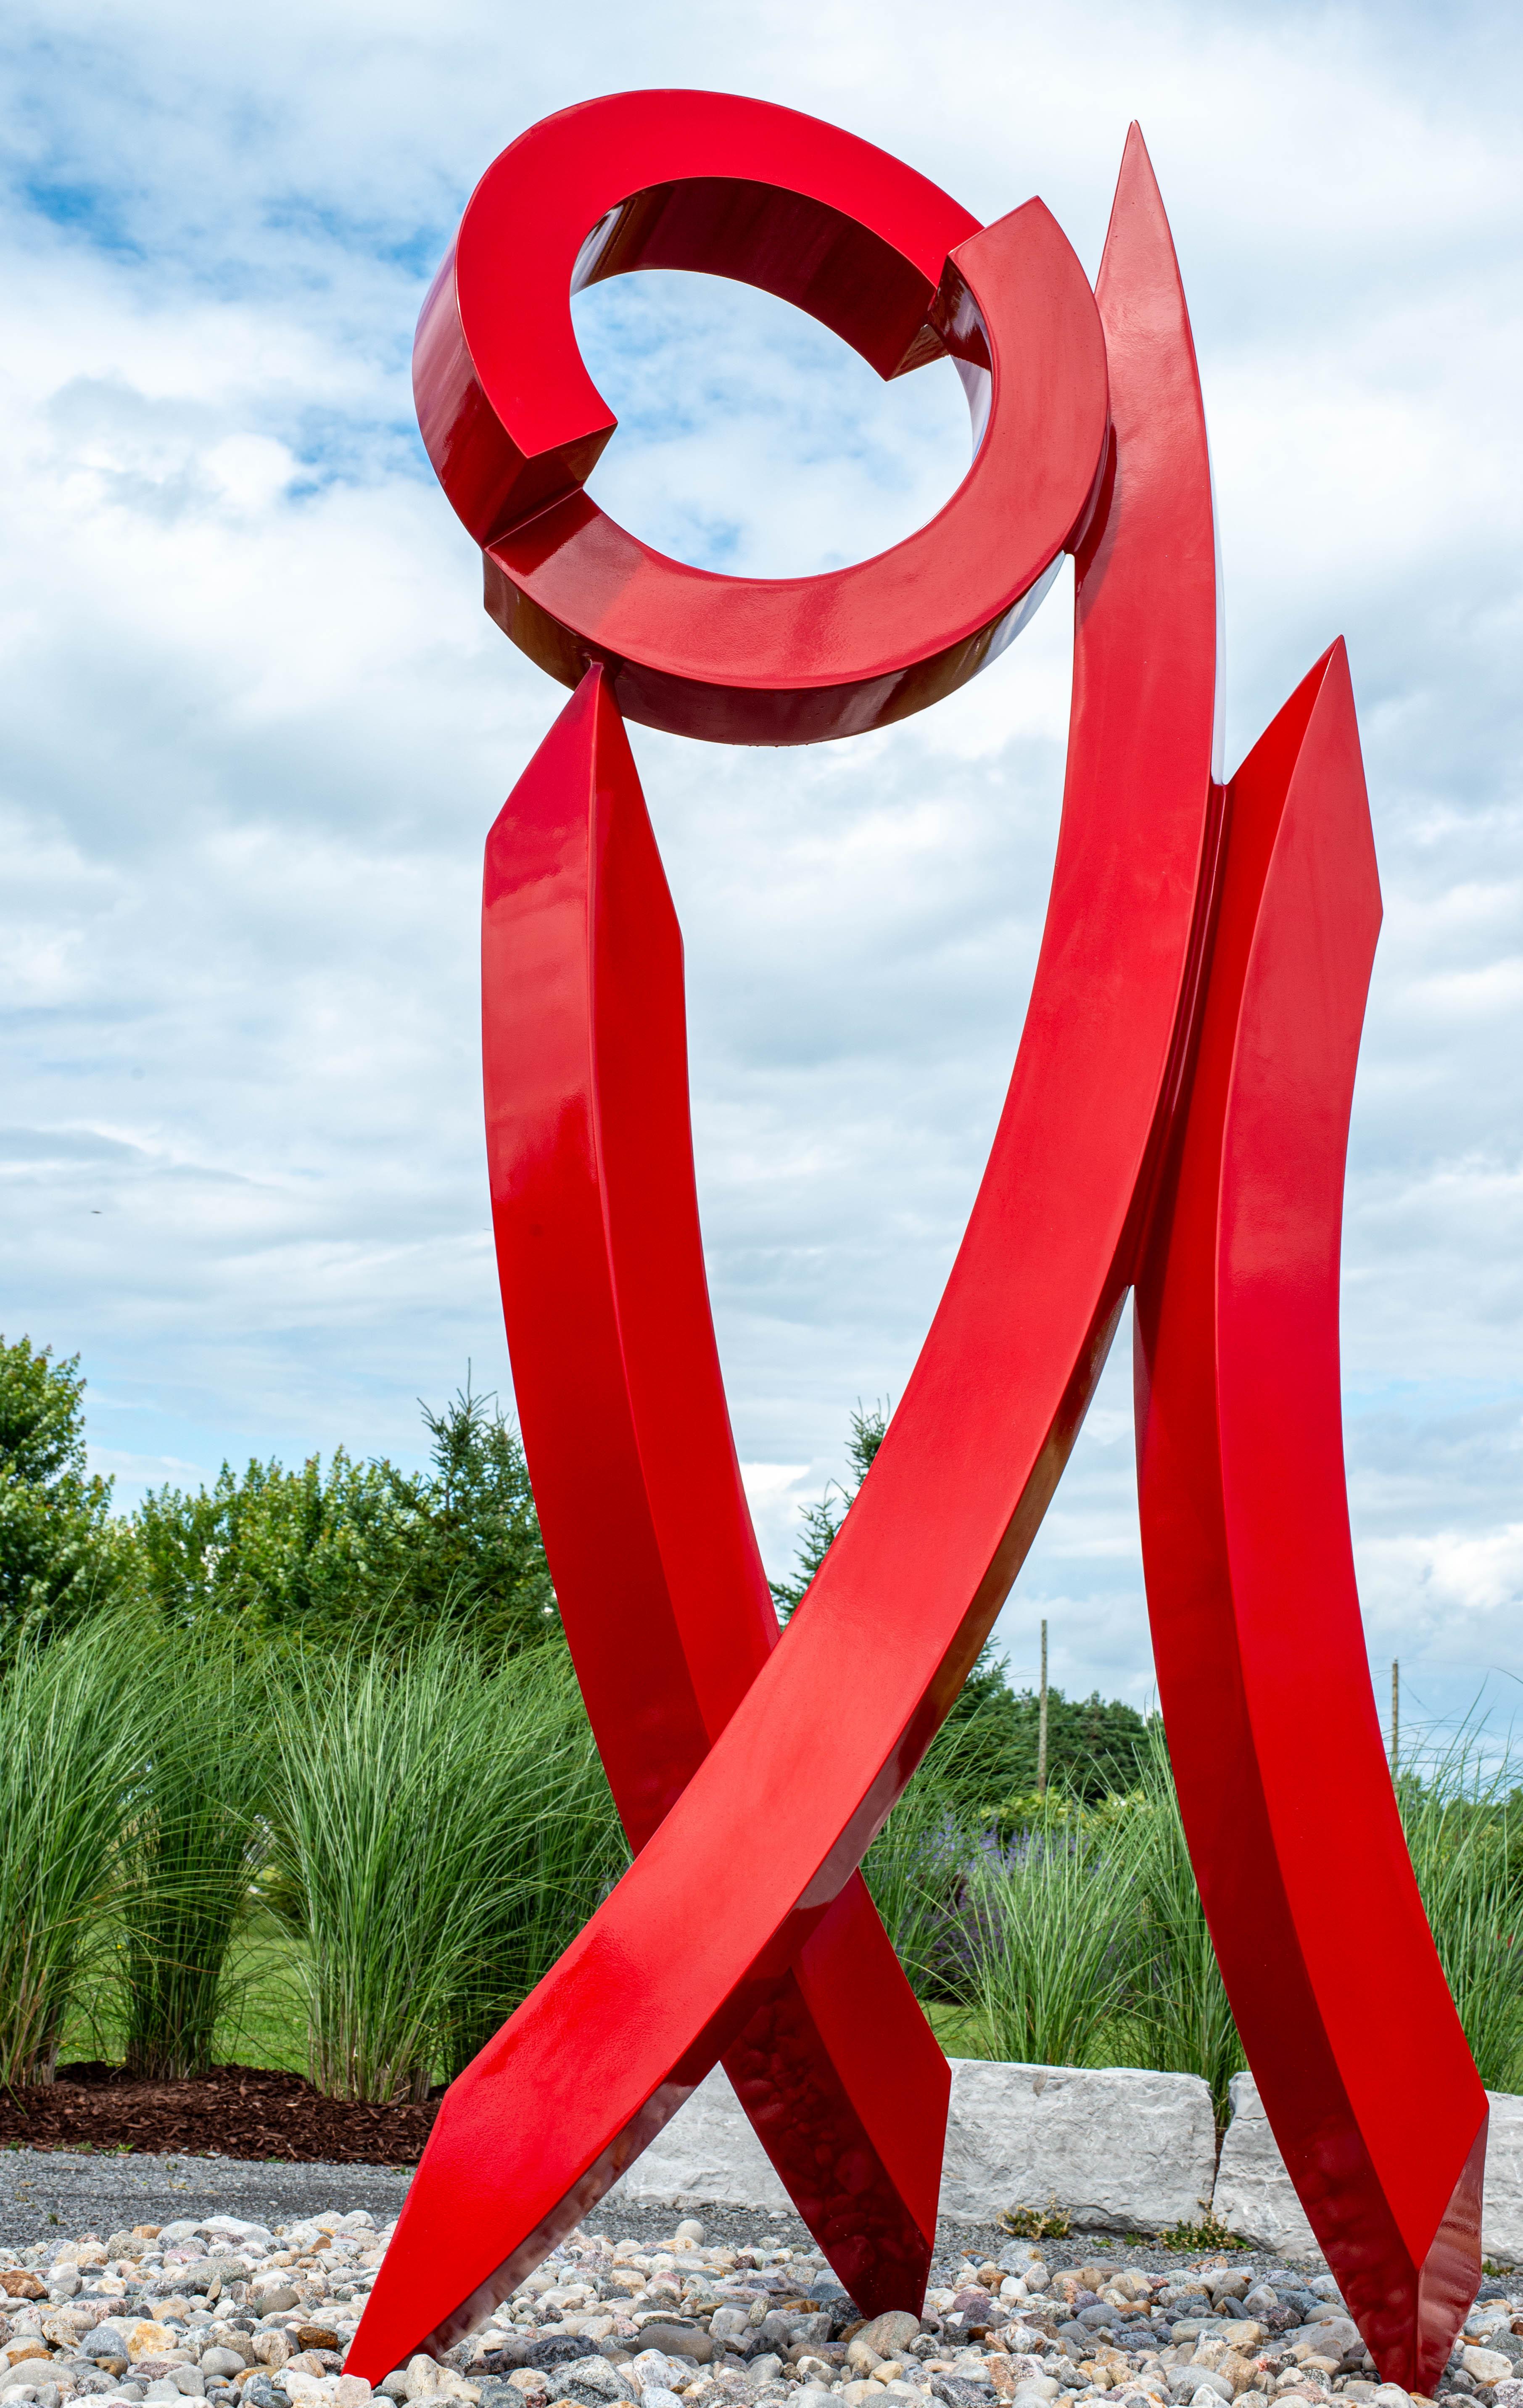 Summer Red Rhythm - contemporary, abstract, stainless steel outdoor sculpture - Abstract Sculpture by Rob Lorenson